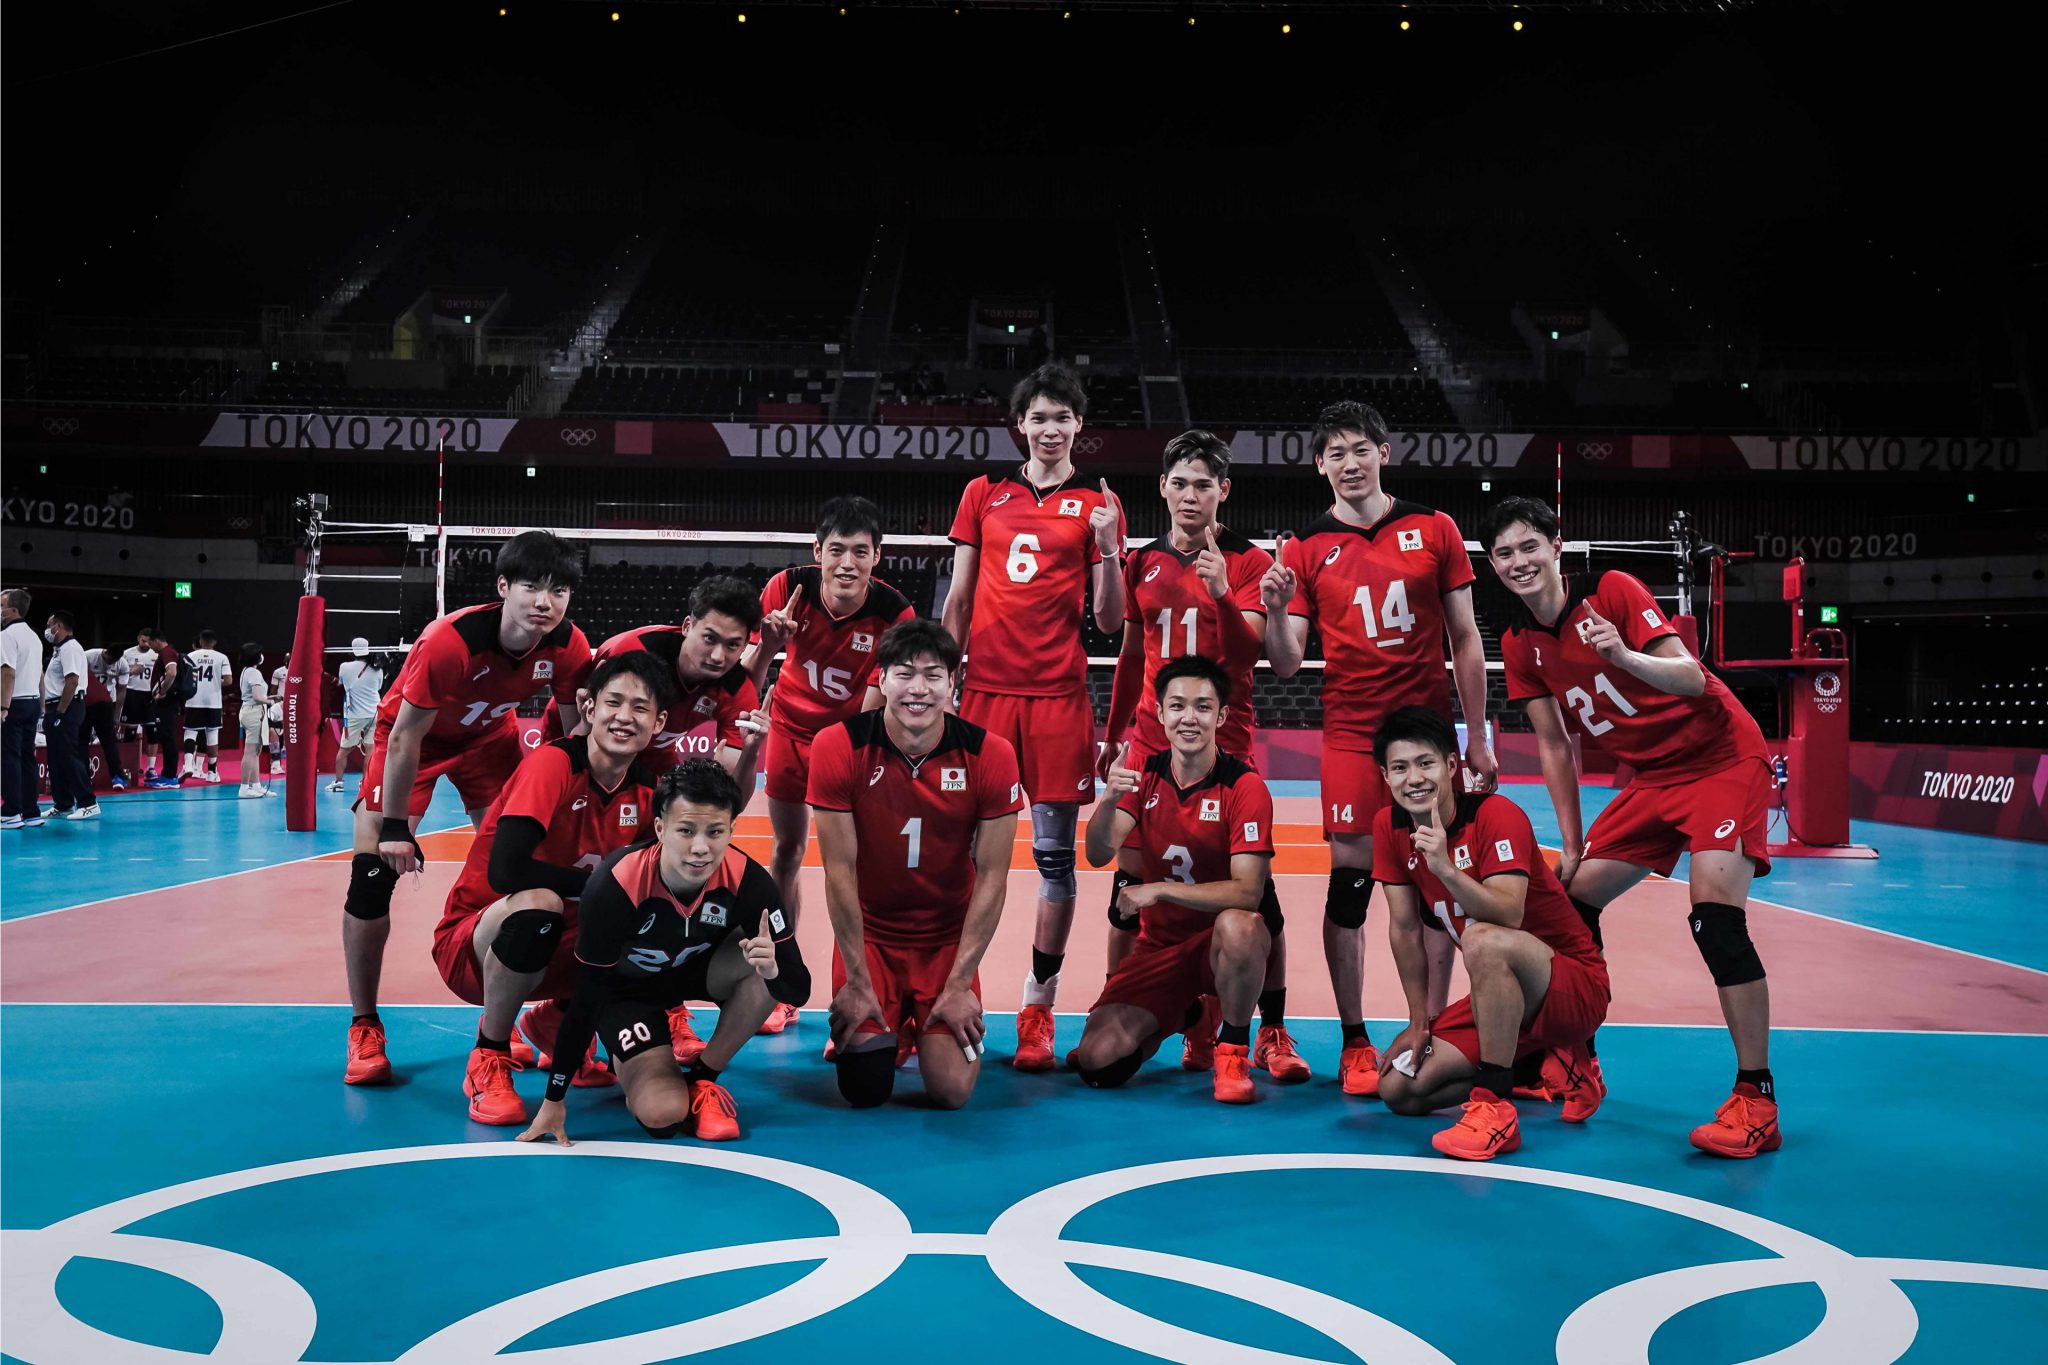 JAPAN OFF TO VICTORIOUS START IN TOKYO 2020 - Asian Volleyball ...